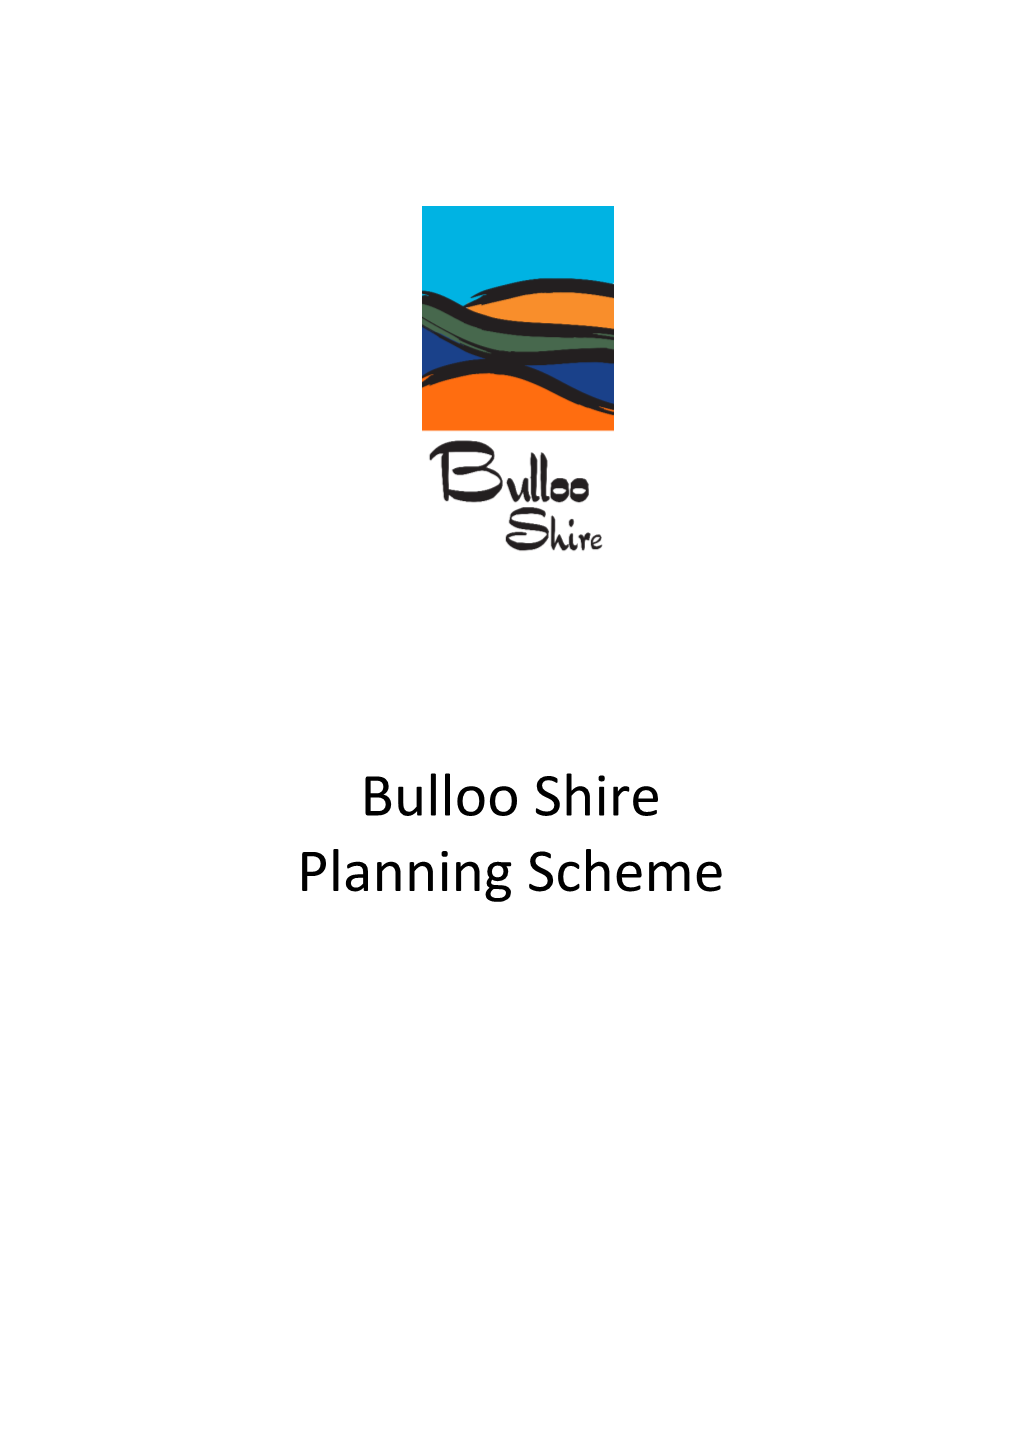 Bulloo Shire Planning Scheme Citation and Commencement